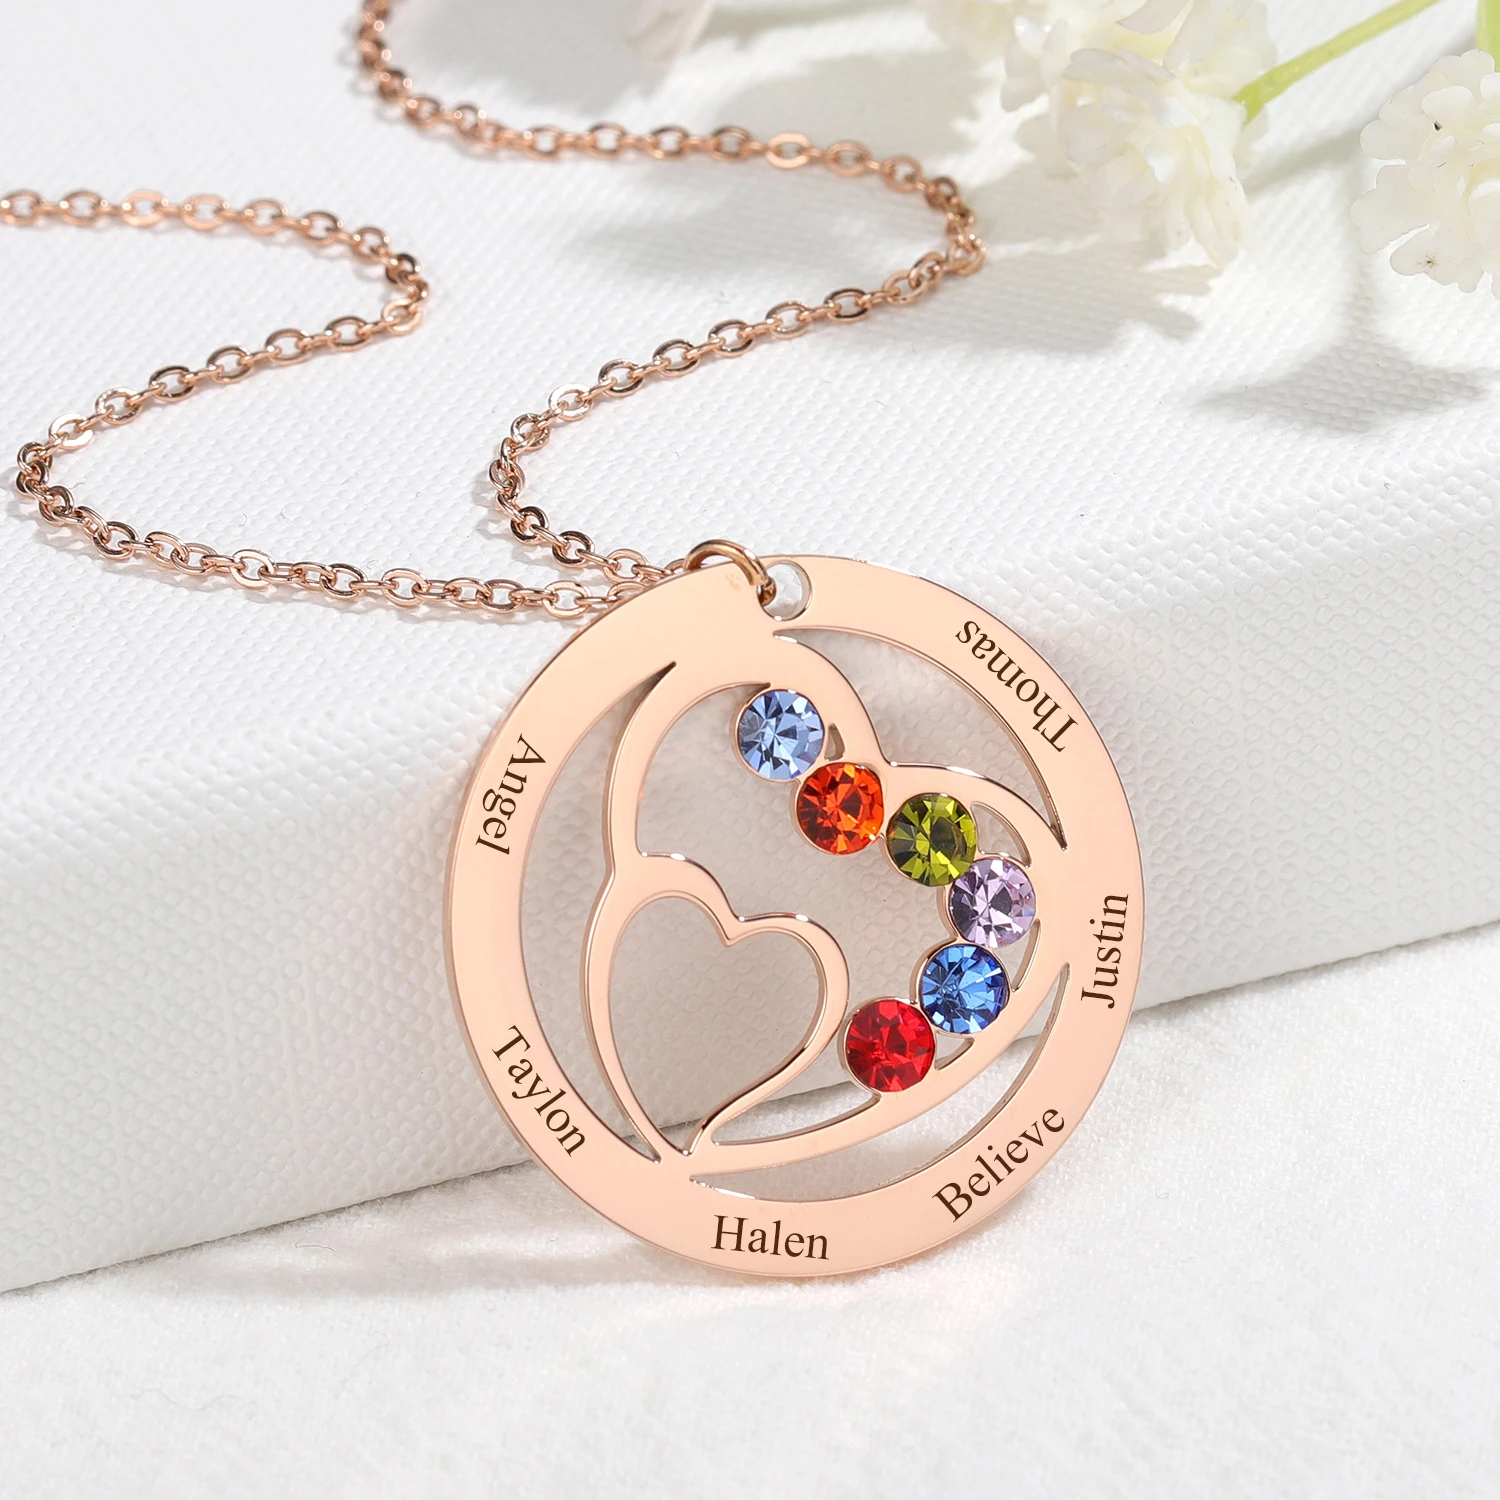 

Custom Engraved Name Pendant For Family Personalized Birthstone Name Necklace Round Stainless steel Jewelry Heart Collares Gifts